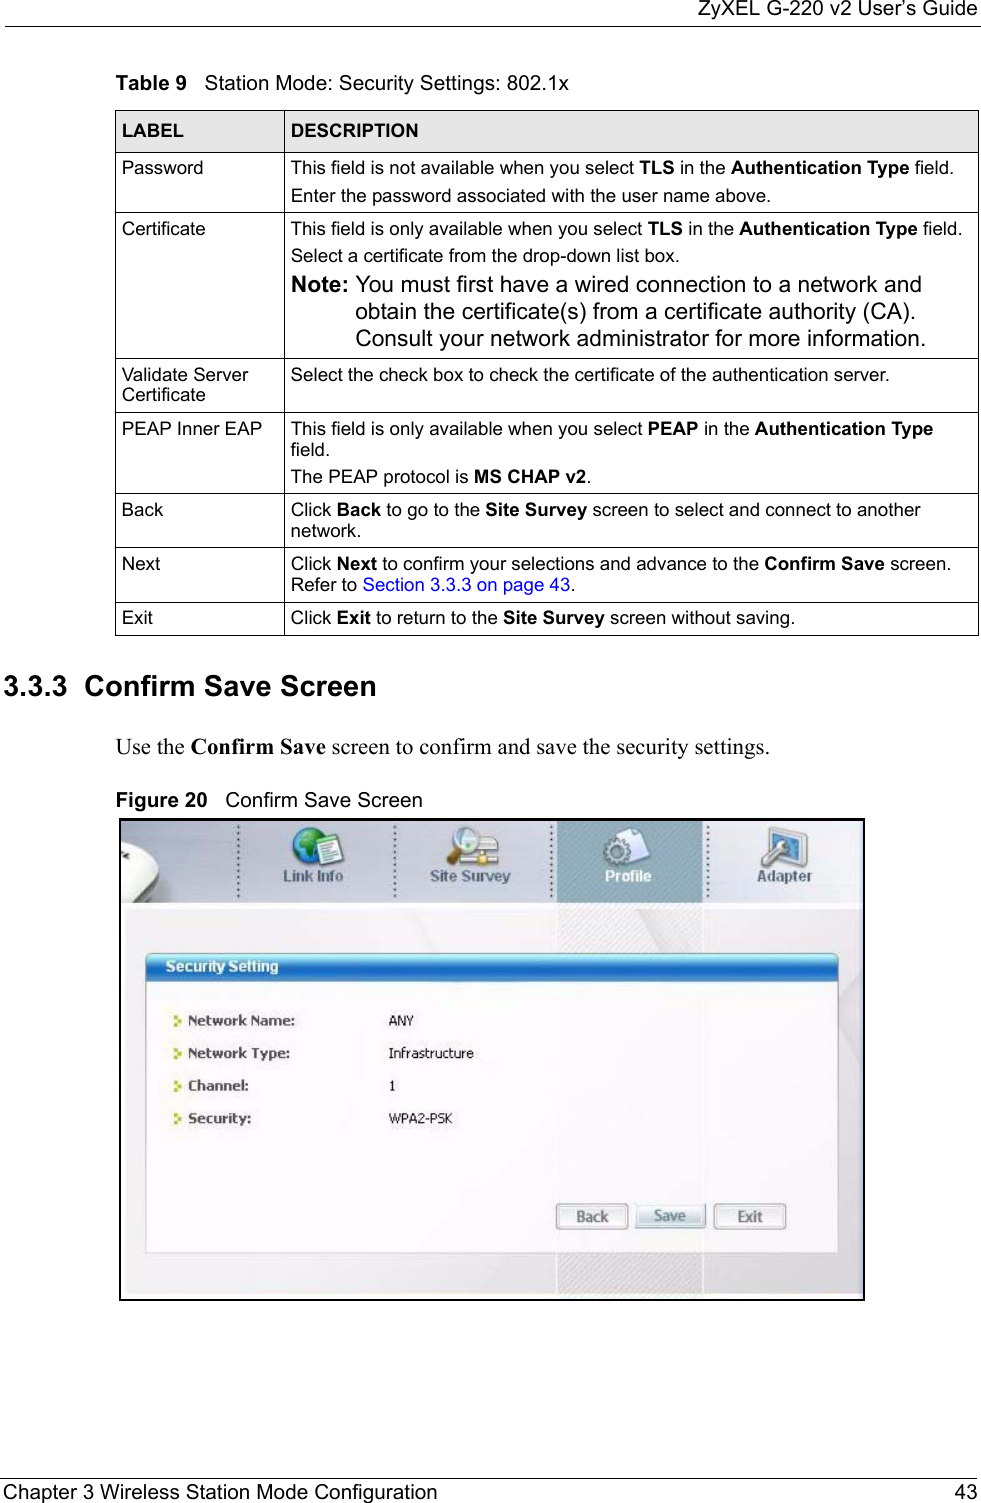 ZyXEL G-220 v2 User’s GuideChapter 3 Wireless Station Mode Configuration 433.3.3  Confirm Save ScreenUse the Confirm Save screen to confirm and save the security settings.Figure 20   Confirm Save Screen Password This field is not available when you select TLS in the Authentication Type field. Enter the password associated with the user name above. Certificate This field is only available when you select TLS in the Authentication Type field. Select a certificate from the drop-down list box.Note: You must first have a wired connection to a network and obtain the certificate(s) from a certificate authority (CA). Consult your network administrator for more information.Validate Server CertificateSelect the check box to check the certificate of the authentication server.PEAP Inner EAP This field is only available when you select PEAP in the Authentication Type field.The PEAP protocol is MS CHAP v2.Back Click Back to go to the Site Survey screen to select and connect to another network.Next Click Next to confirm your selections and advance to the Confirm Save screen. Refer to Section 3.3.3 on page 43. Exit Click Exit to return to the Site Survey screen without saving.Table 9   Station Mode: Security Settings: 802.1xLABEL DESCRIPTION